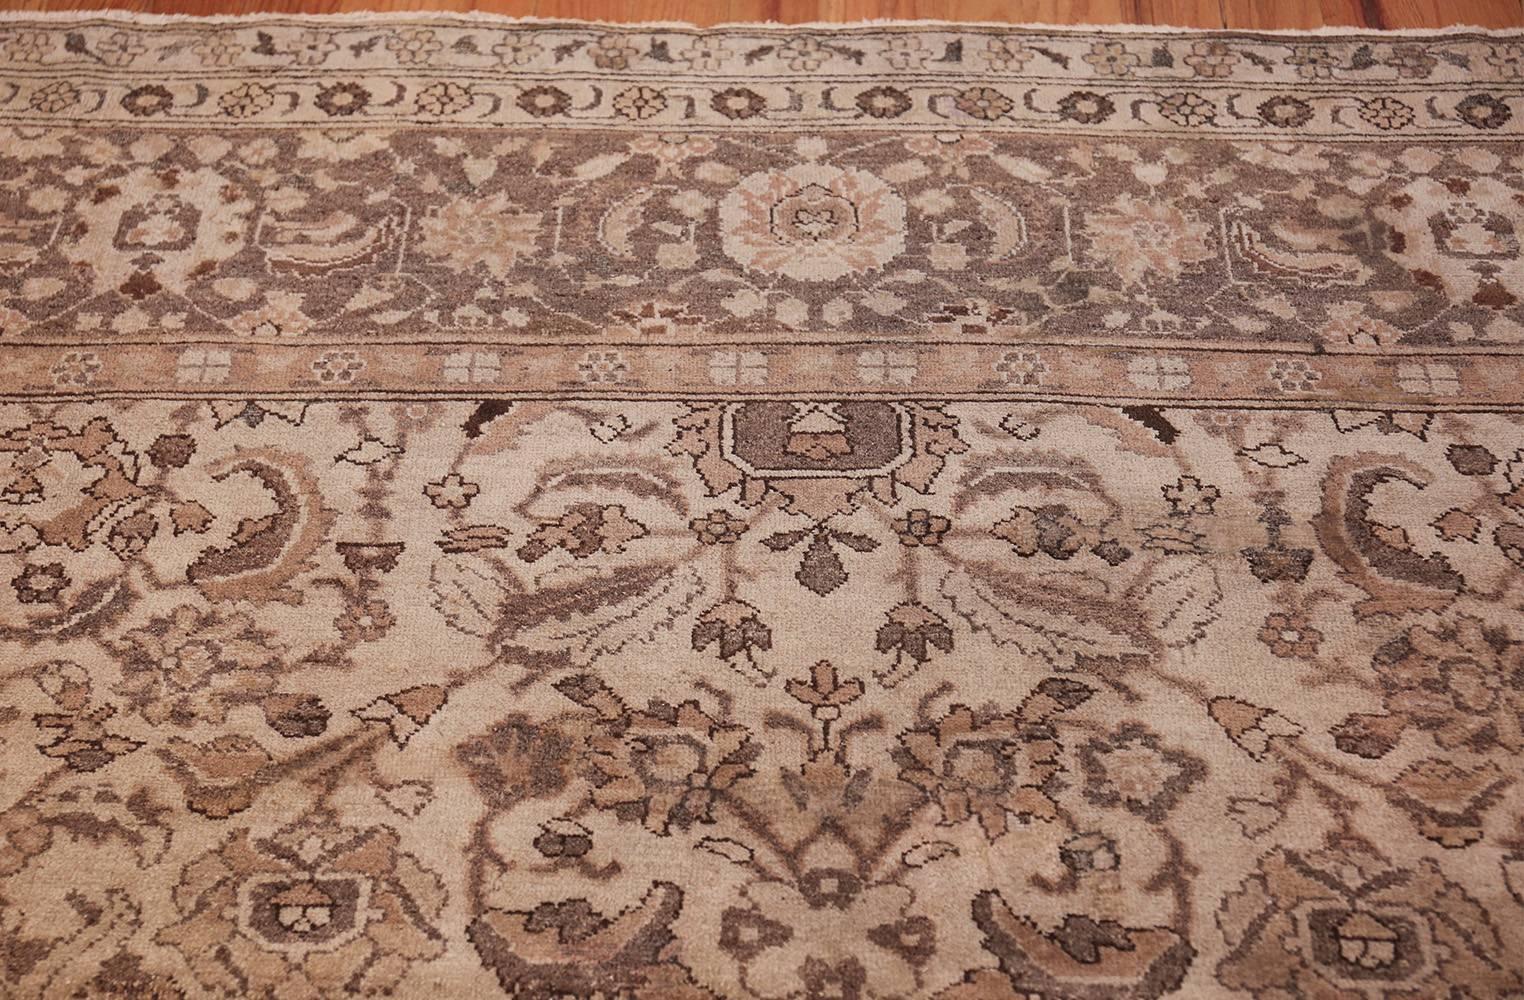 Antique Square Size Agra Indian Rug, Origin: India, Circa: Early 20th Century – Size: 10 ft 3 in x 10 ft 5 in (3.12 m x 3.17 m).